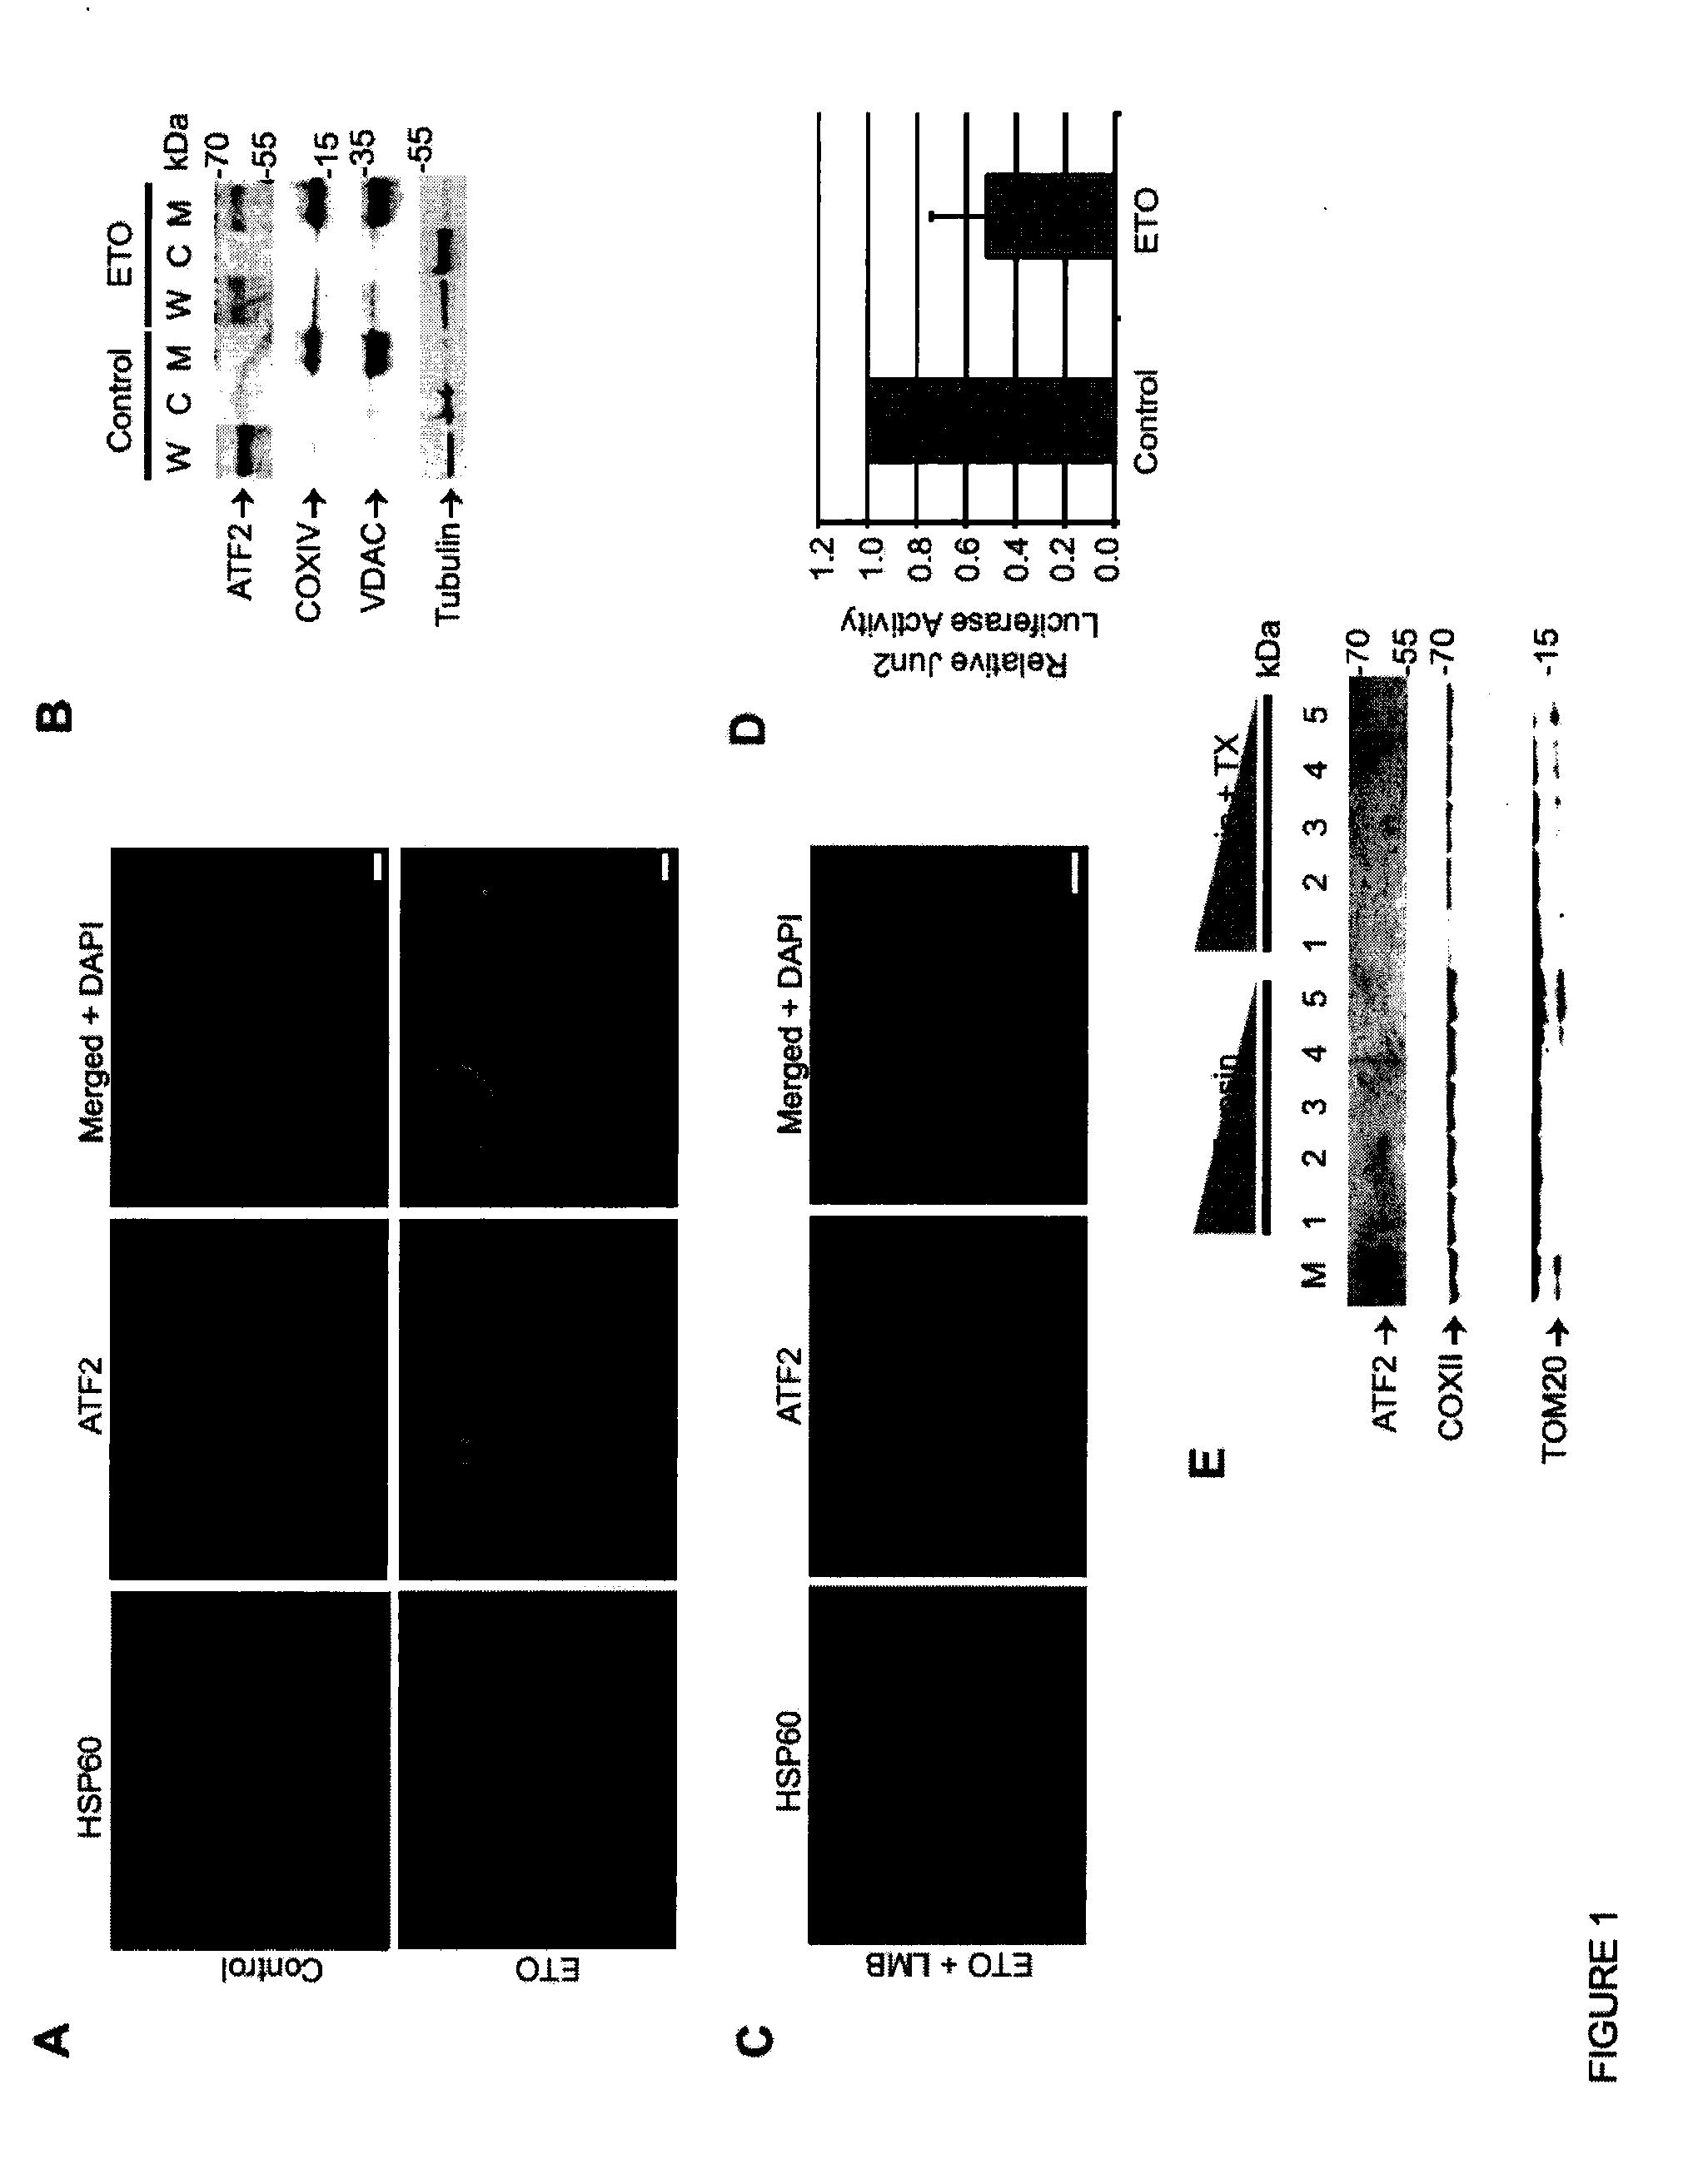 Methods for diagnosis and treatment of cellular proliferative disorders